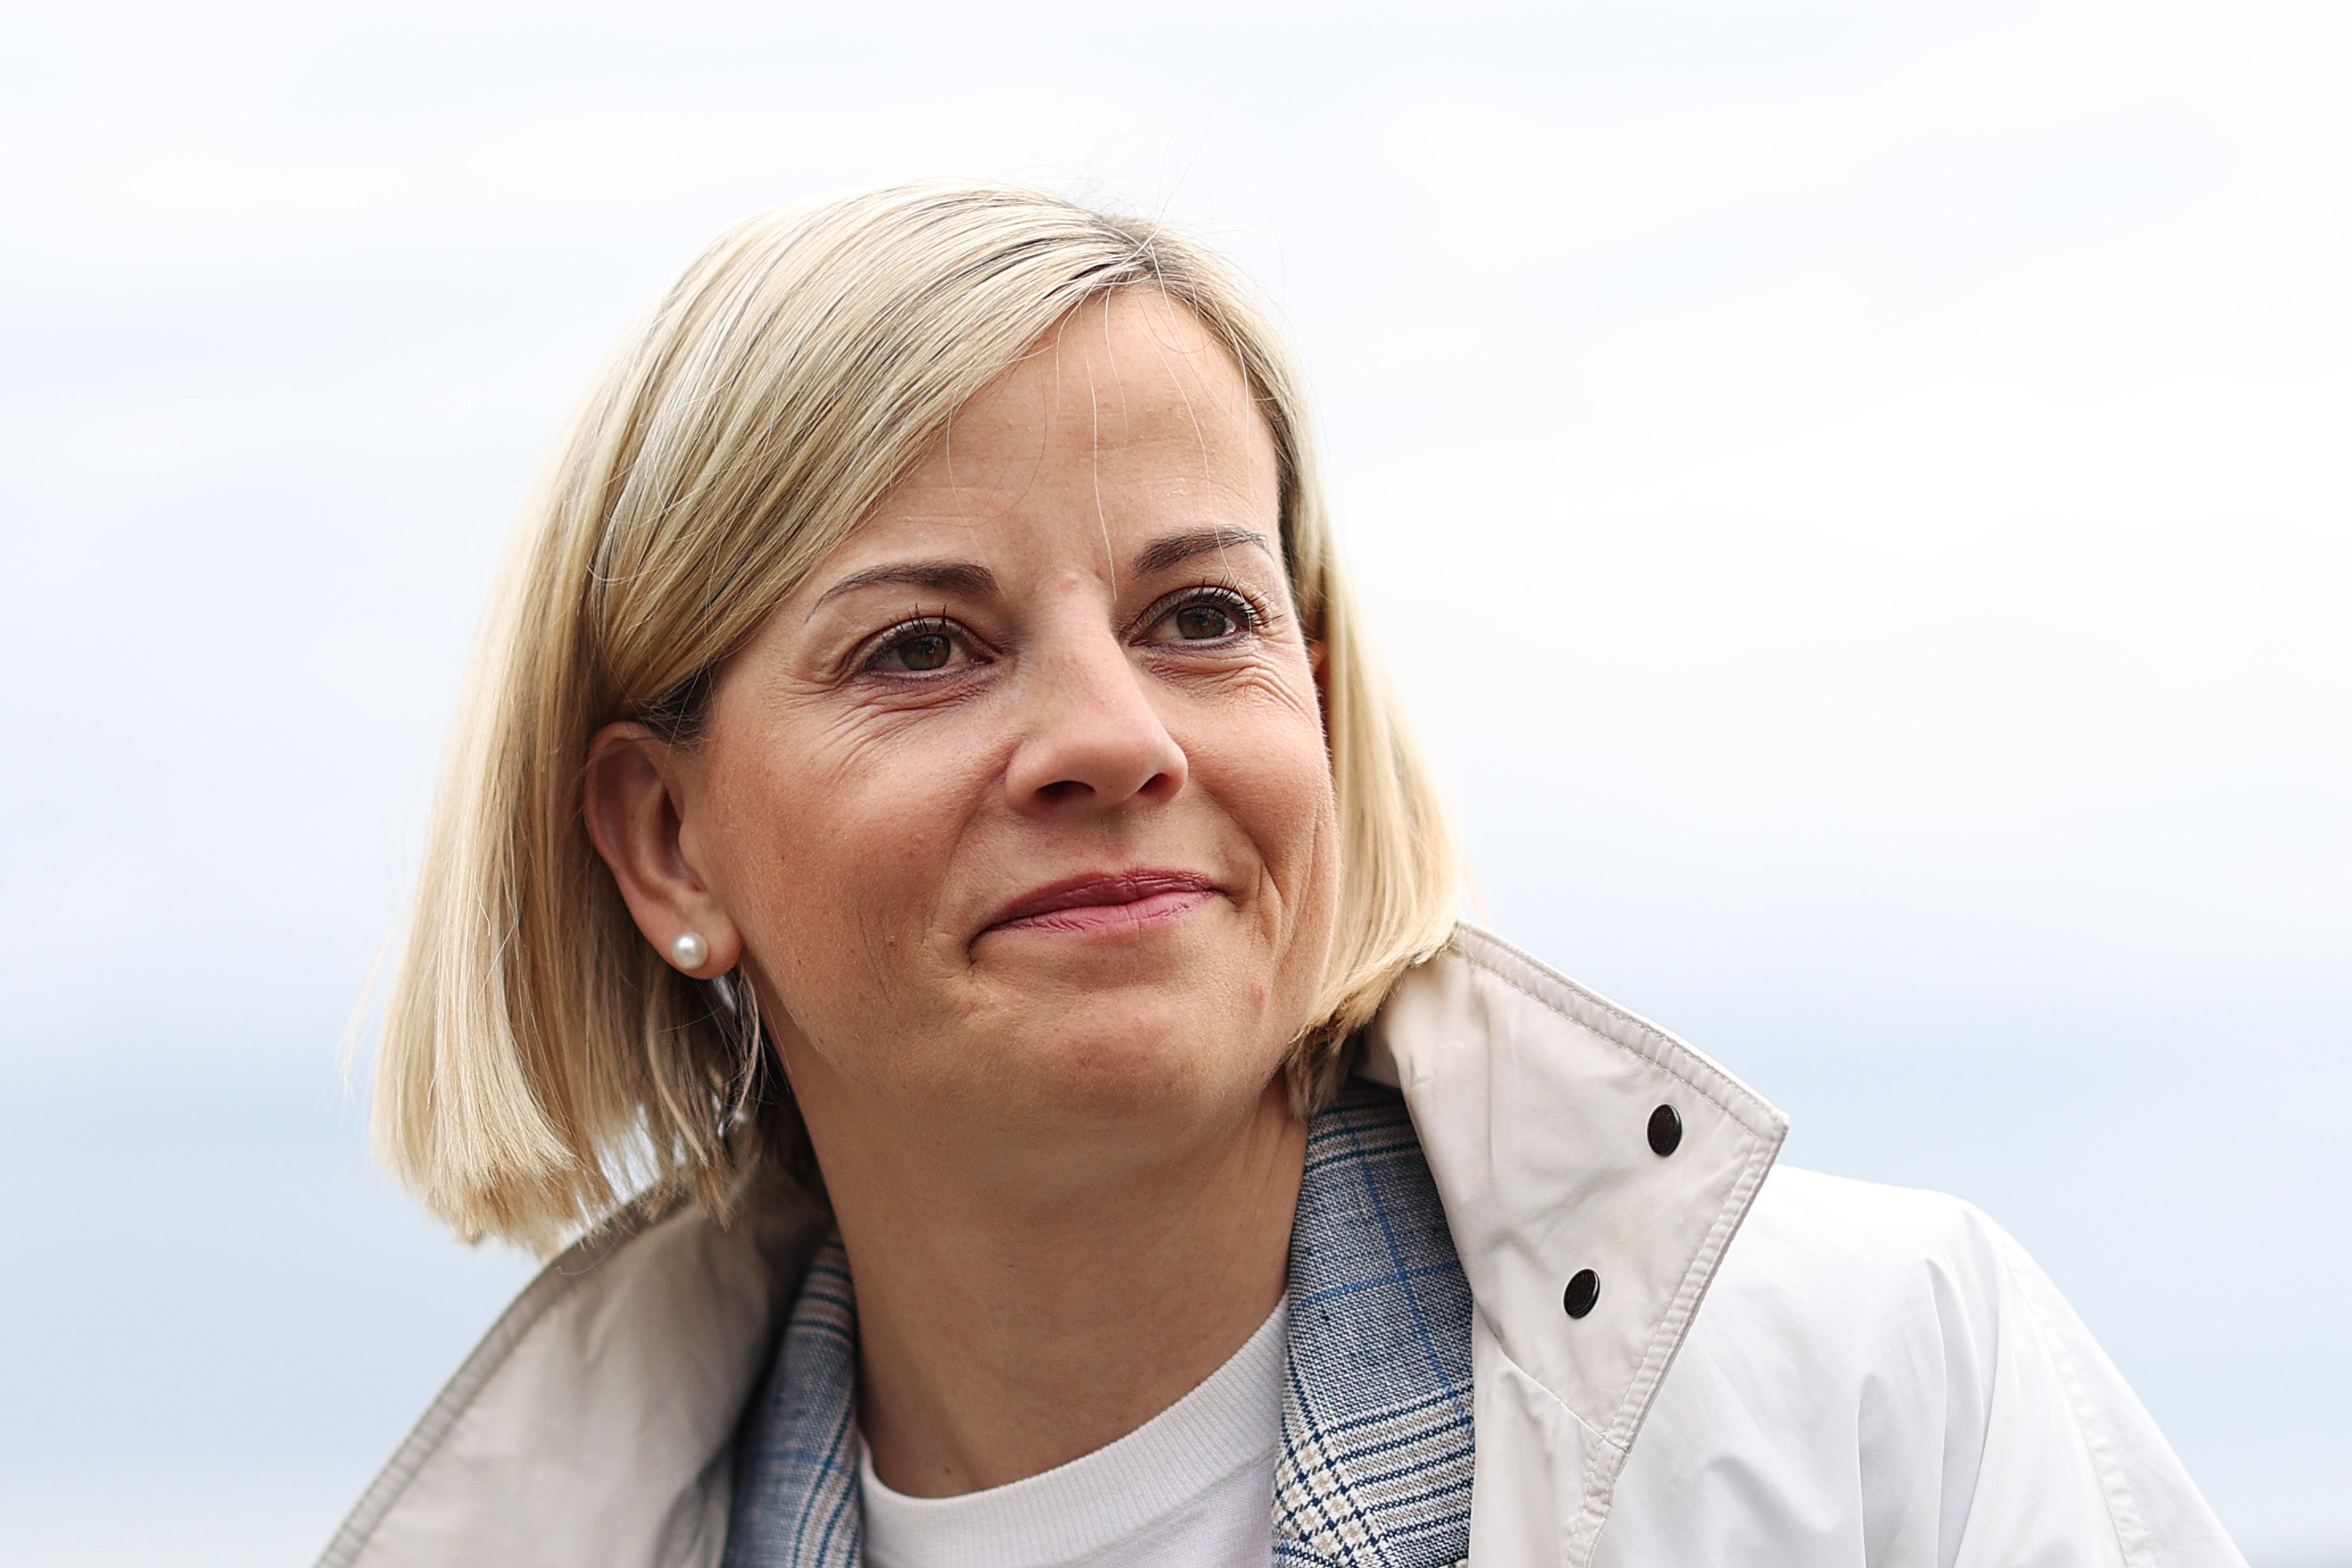 Susie Wolff slammed the FIA in a statement on Friday